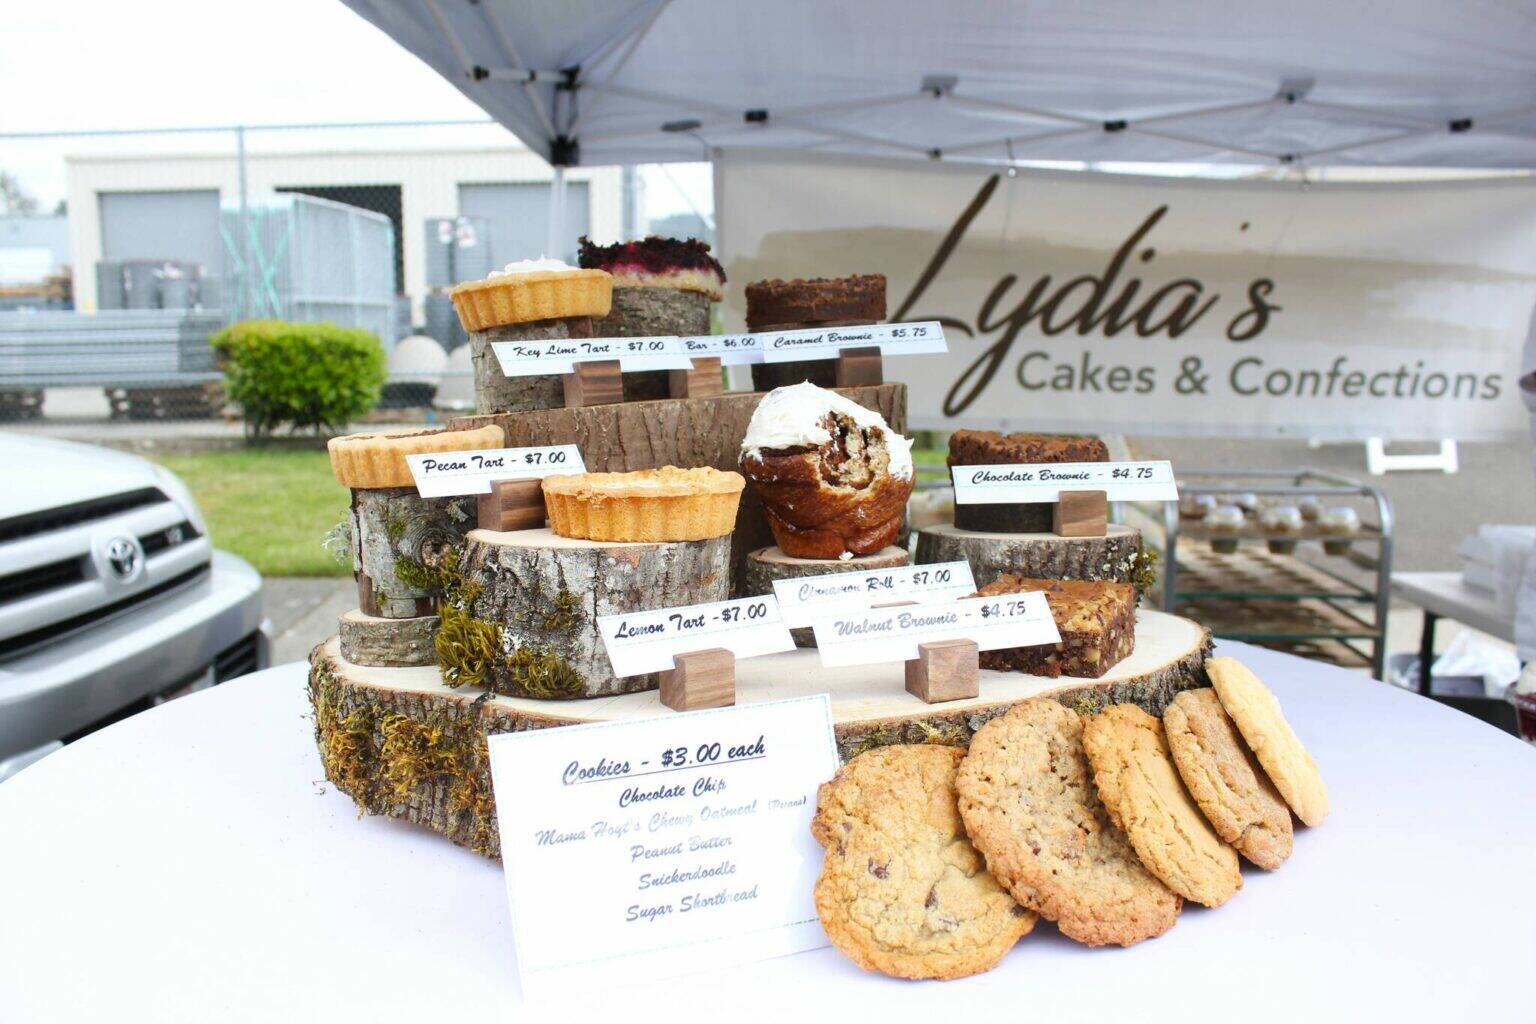 Photo by Ray Miller-Still
Lydia’s Cakes and Confections is making a return visit to the Enumclaw Plateau Farmer’s Market, along with many other sweet-tooth-focused vendors.